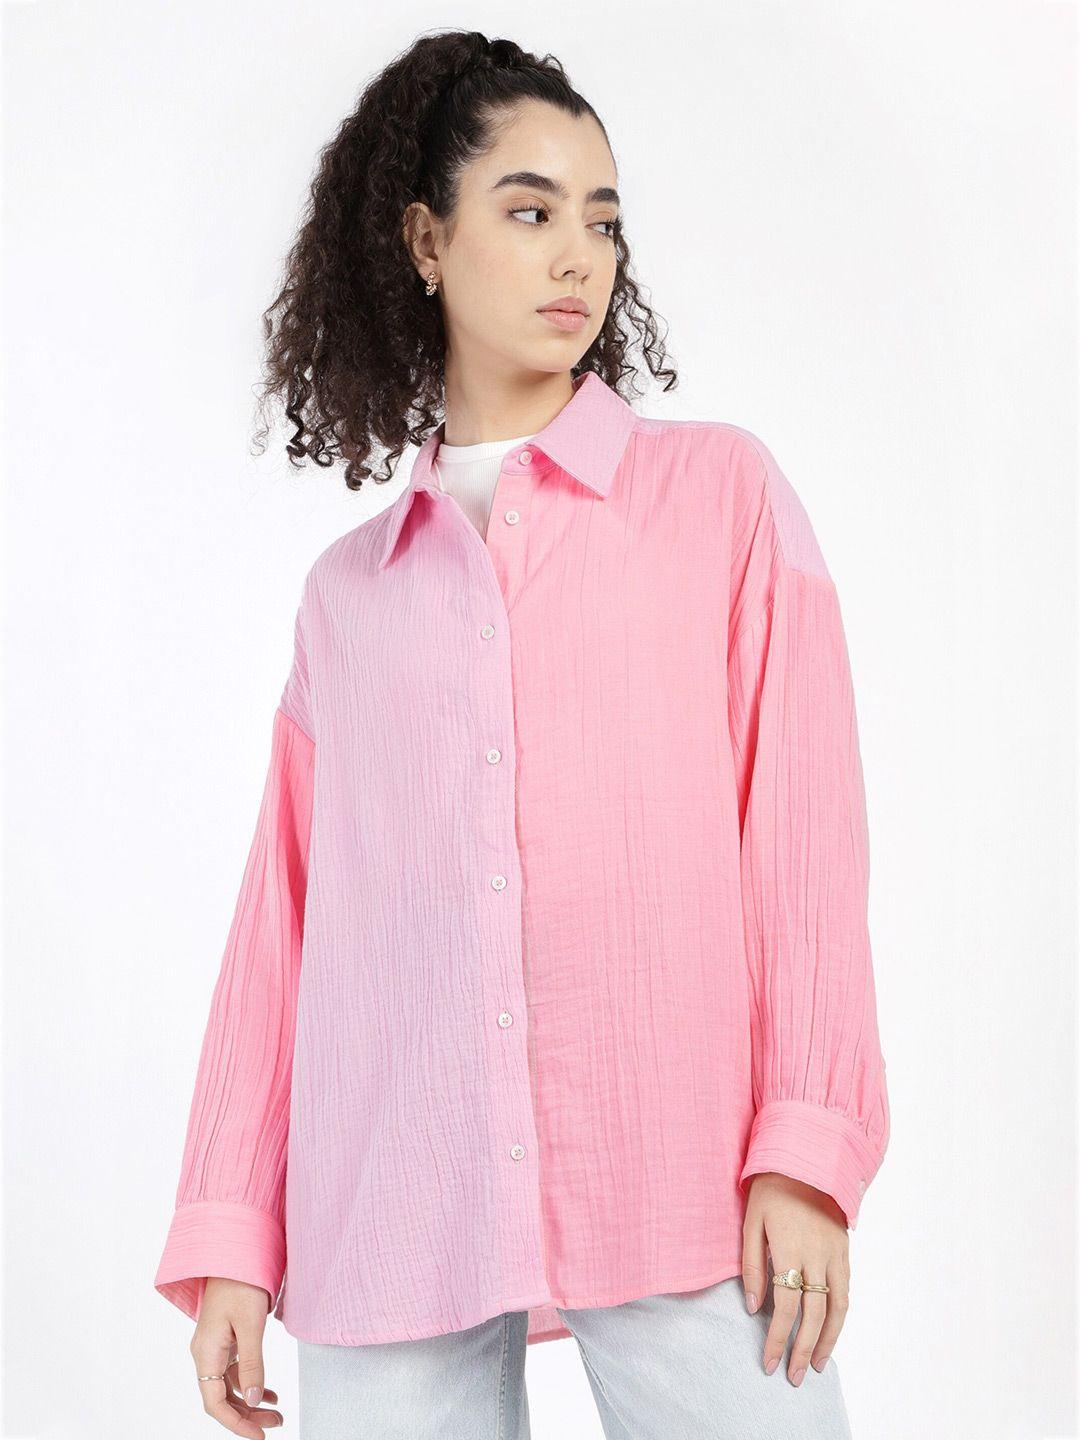 h&m-pure-cotton-full-sleeve-pink-shirt